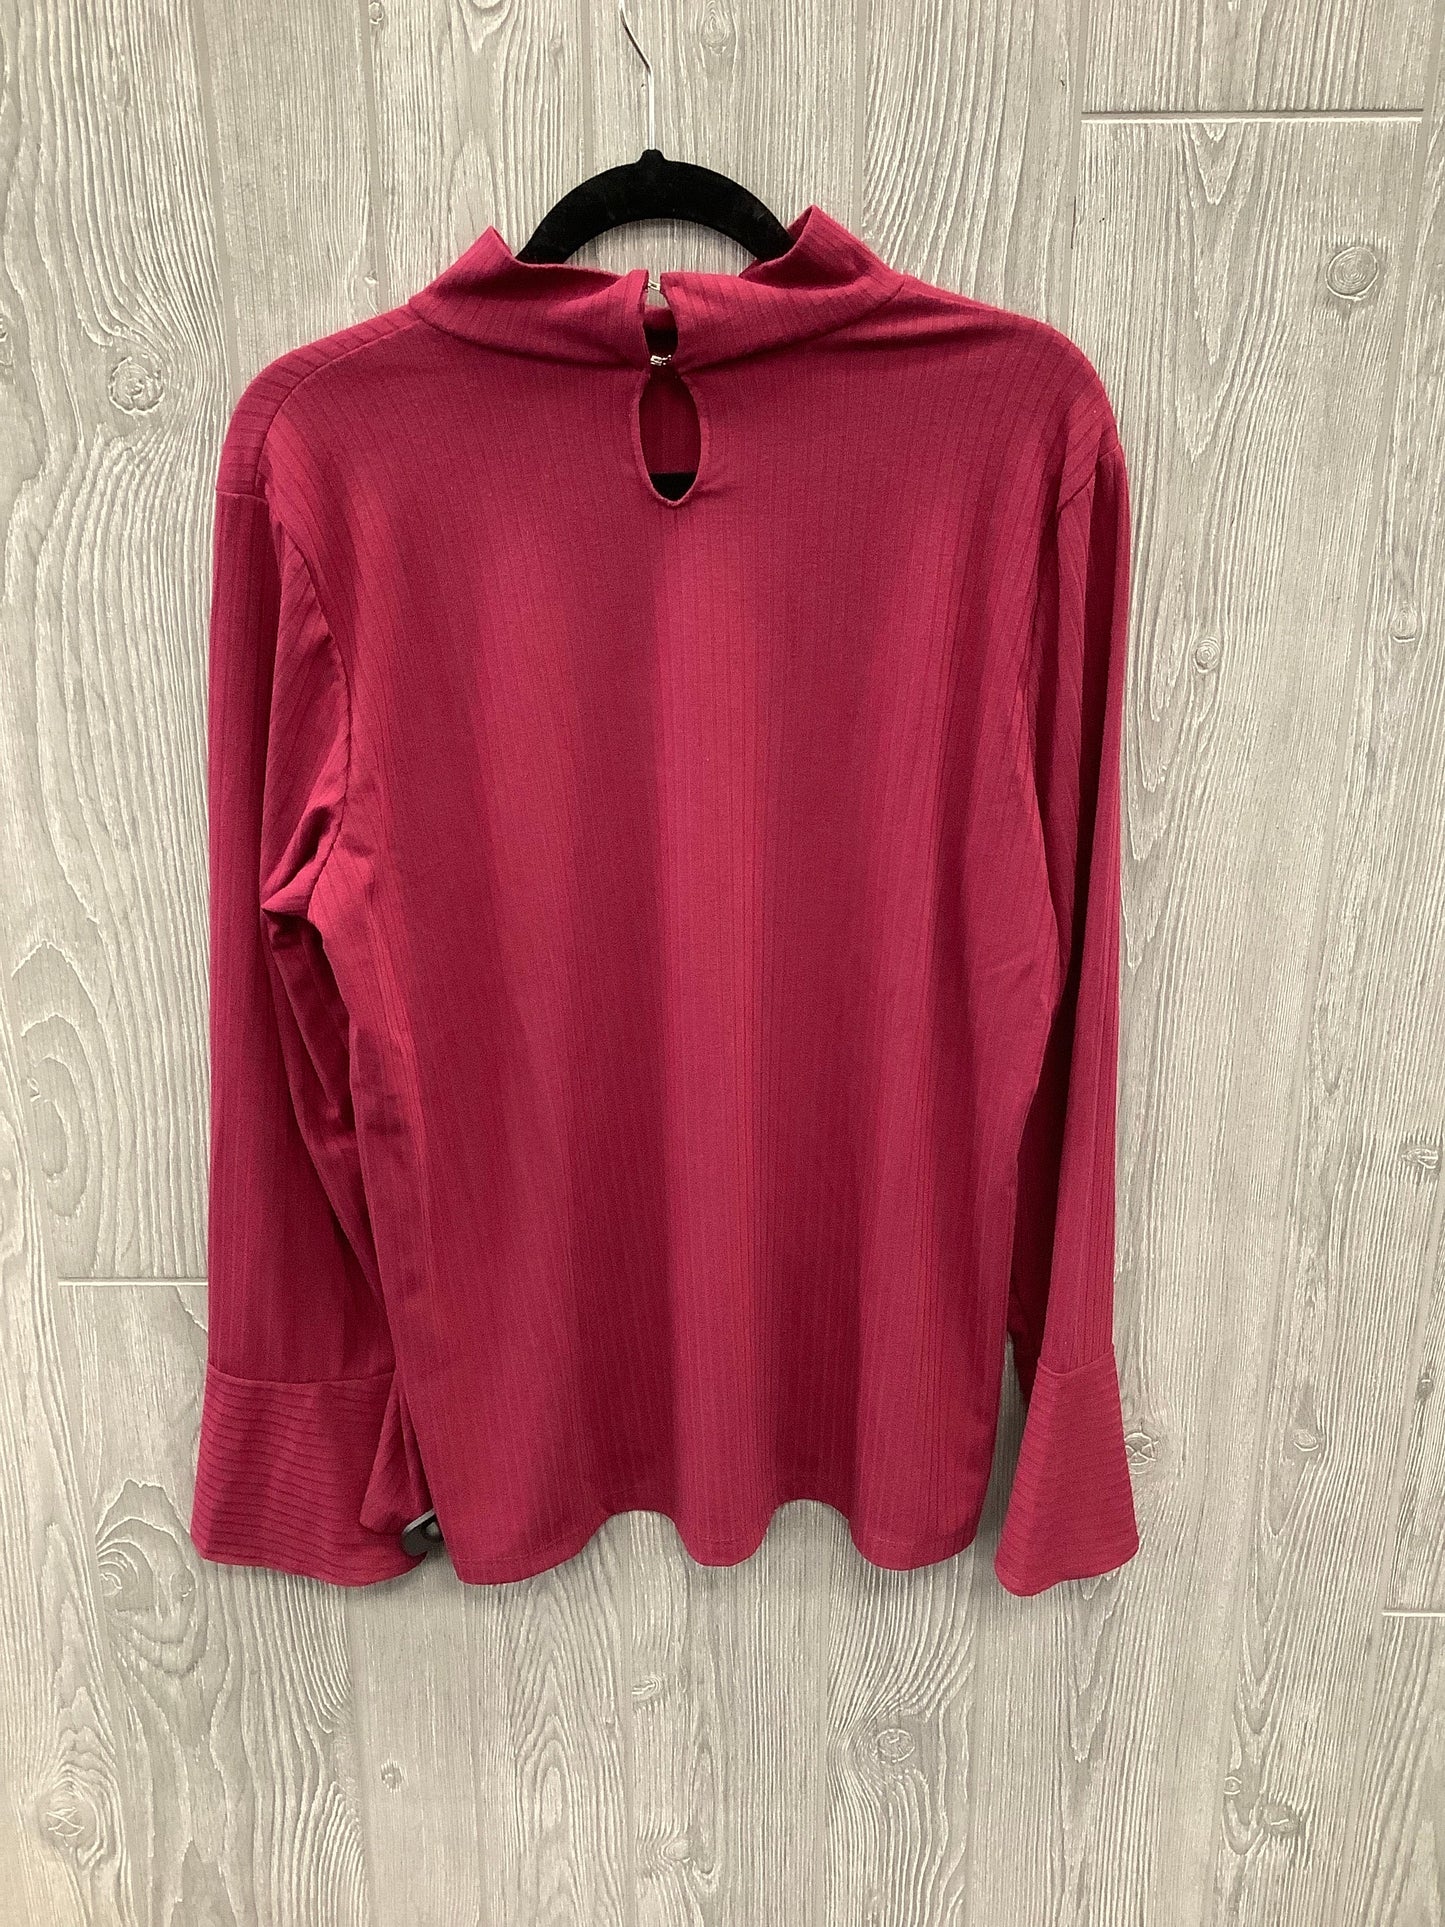 Top Long Sleeve By Slinky Brand  Size: Xl